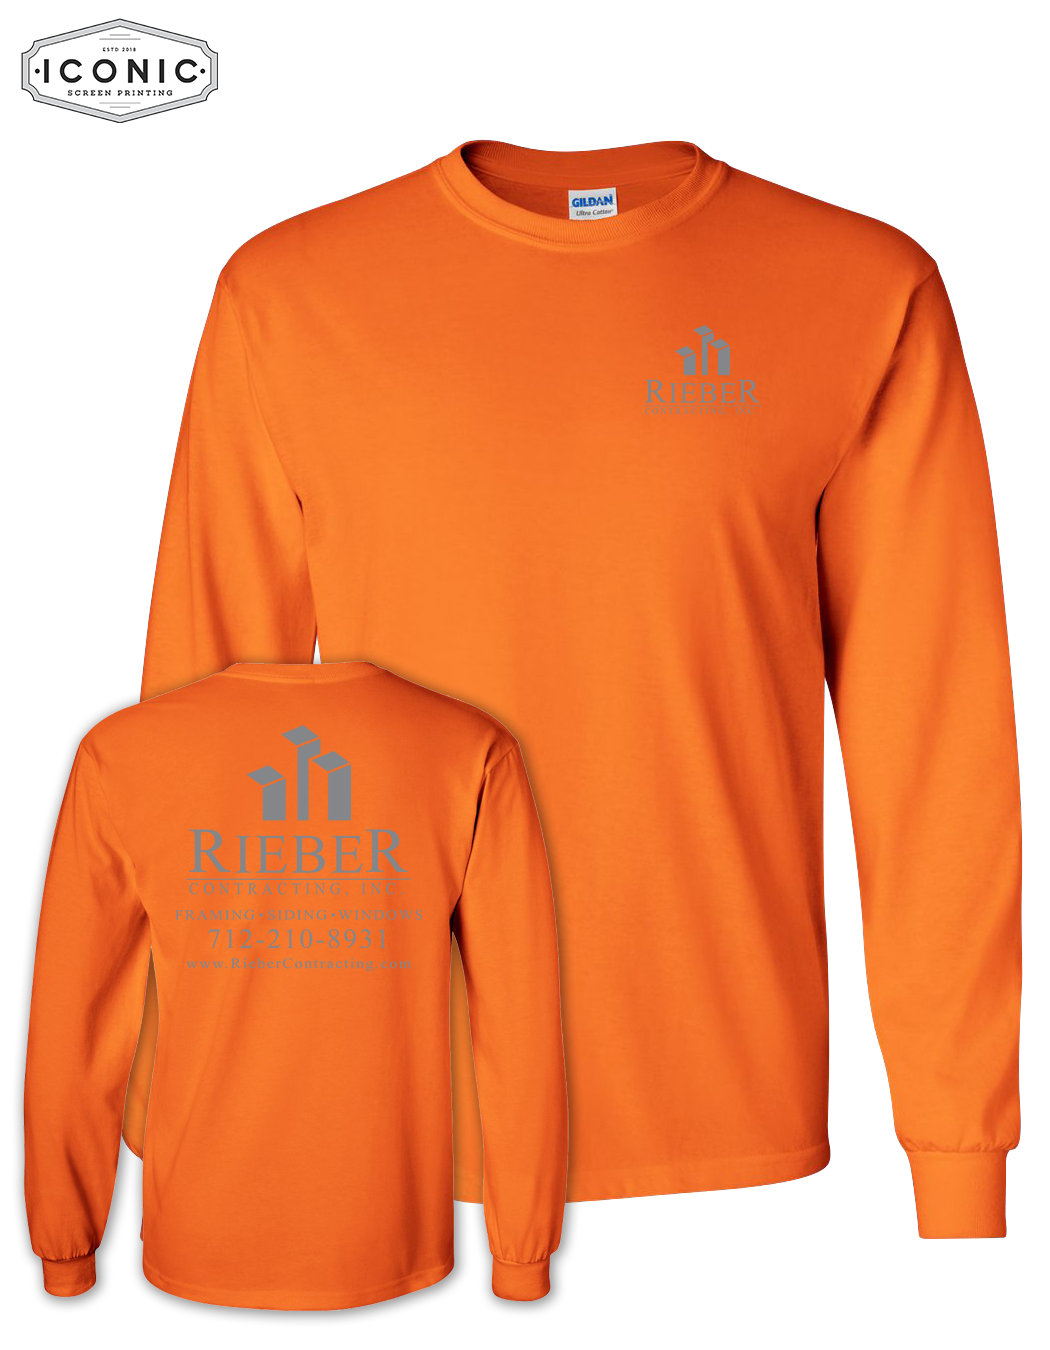 Rieber Contracting - Ultra Cotton Long Sleeve